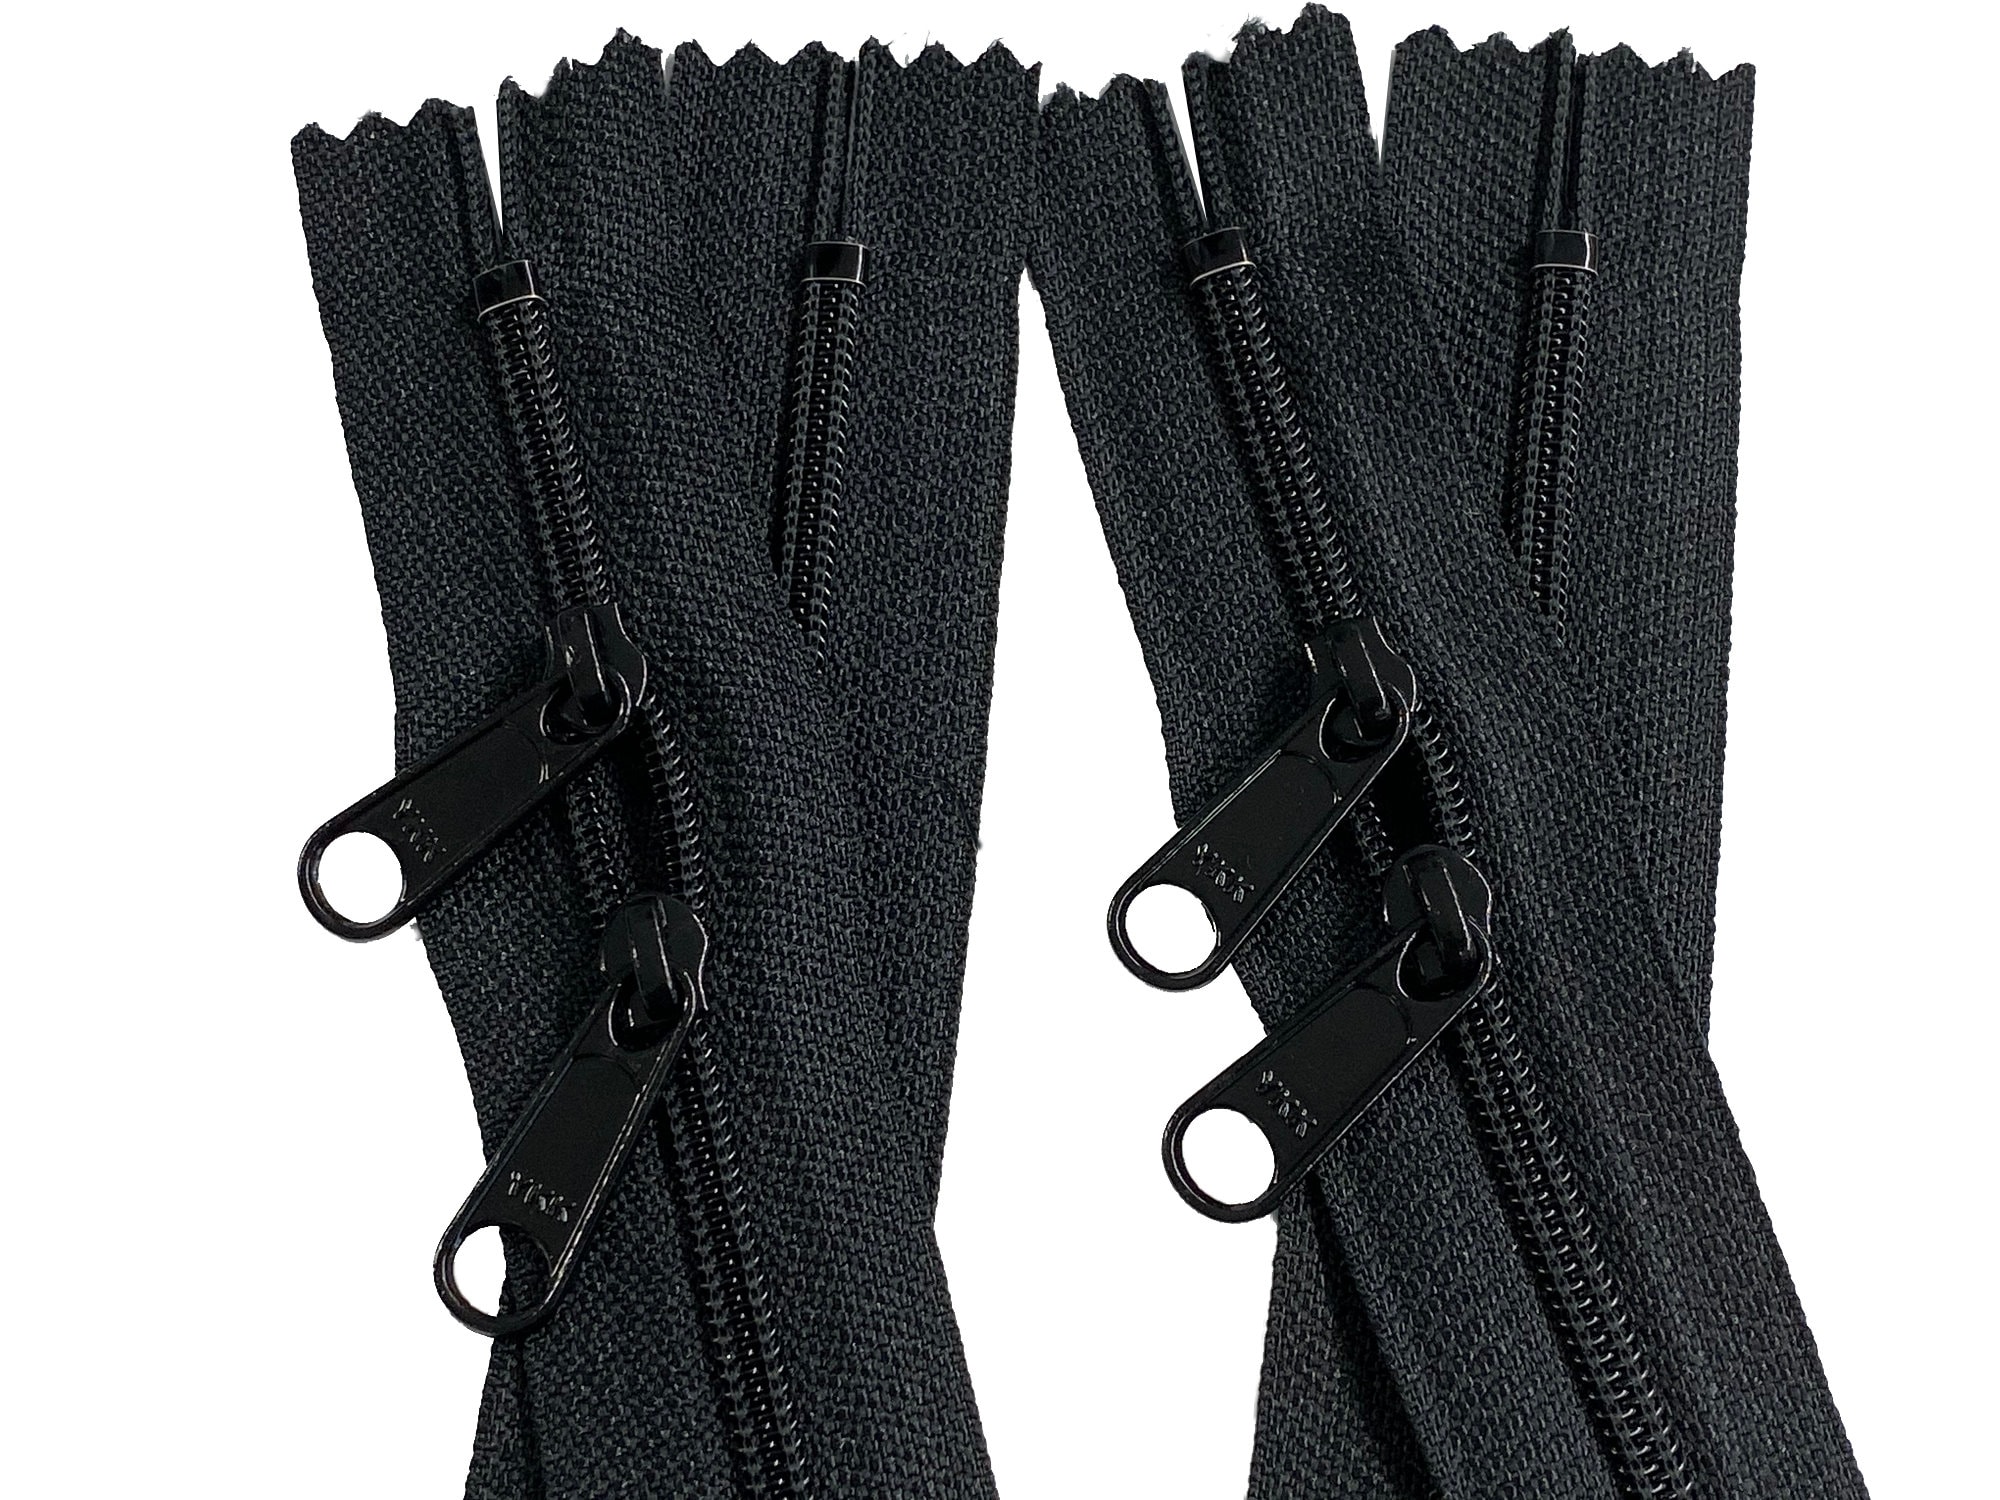 YKK Handbag Zippers #4.5 with Extra-Long Pull - Request Your Own Colors for  Your YKK Zipper Assortment - Made in The USA - (25 Zippers) (20 Inches)